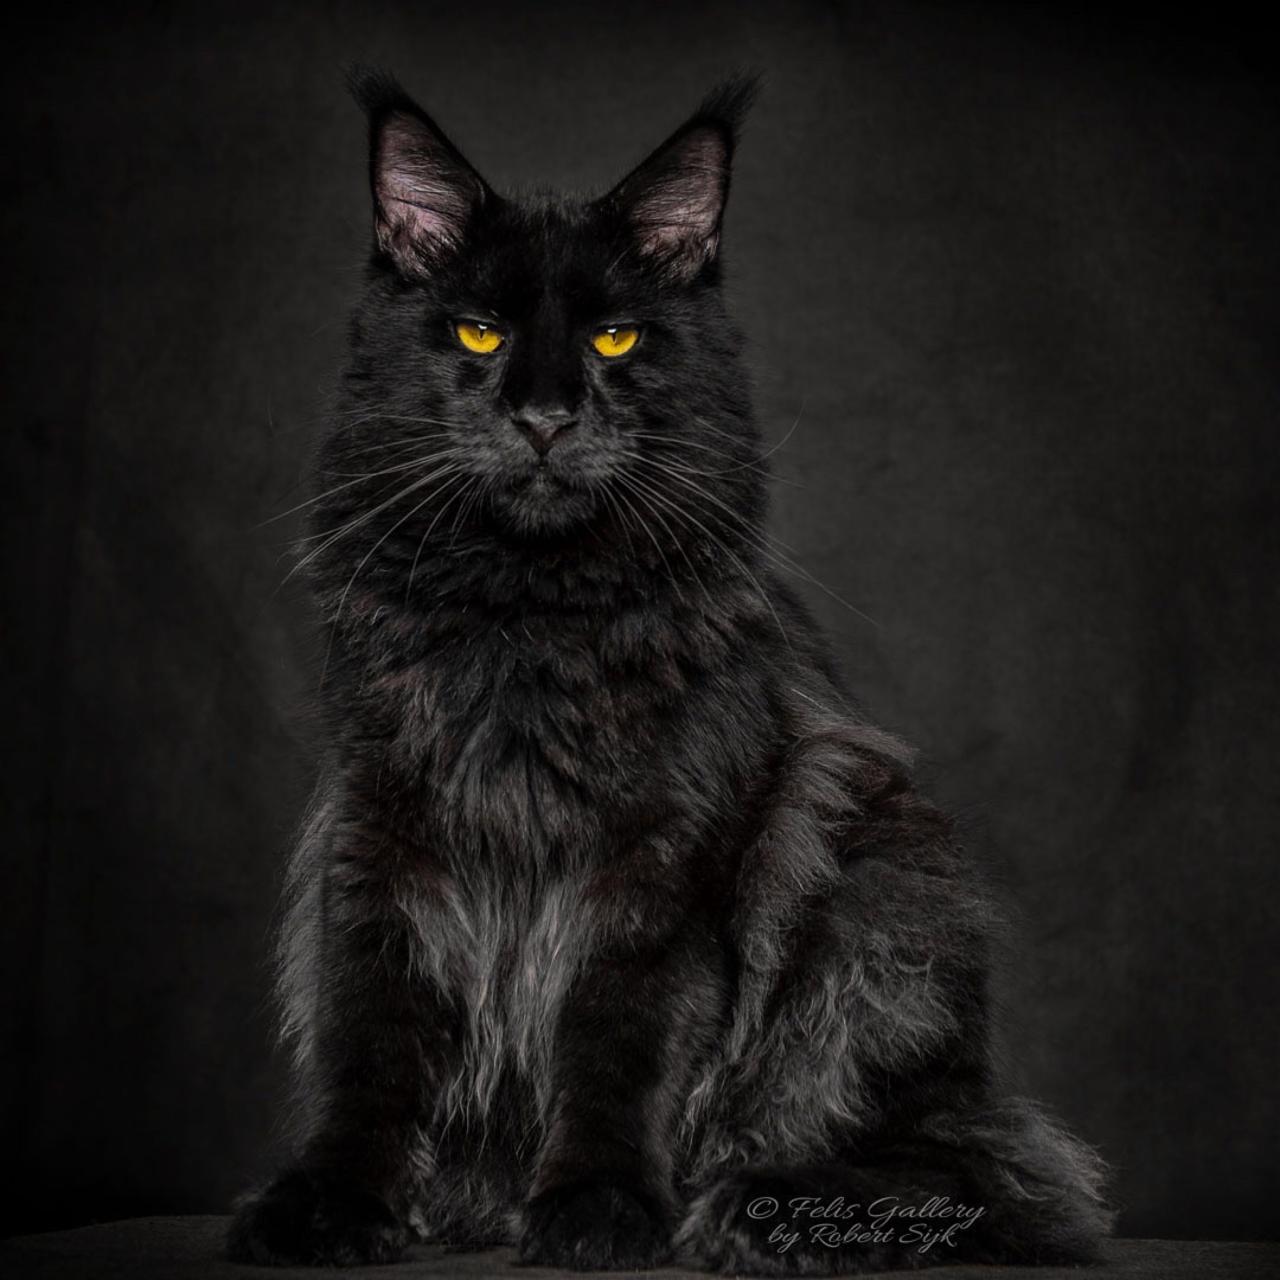 Coon maine kitten portrait cat main cats coons beautiful wallpaper maincoon gato chat brown cute mane kitty mine adorable face